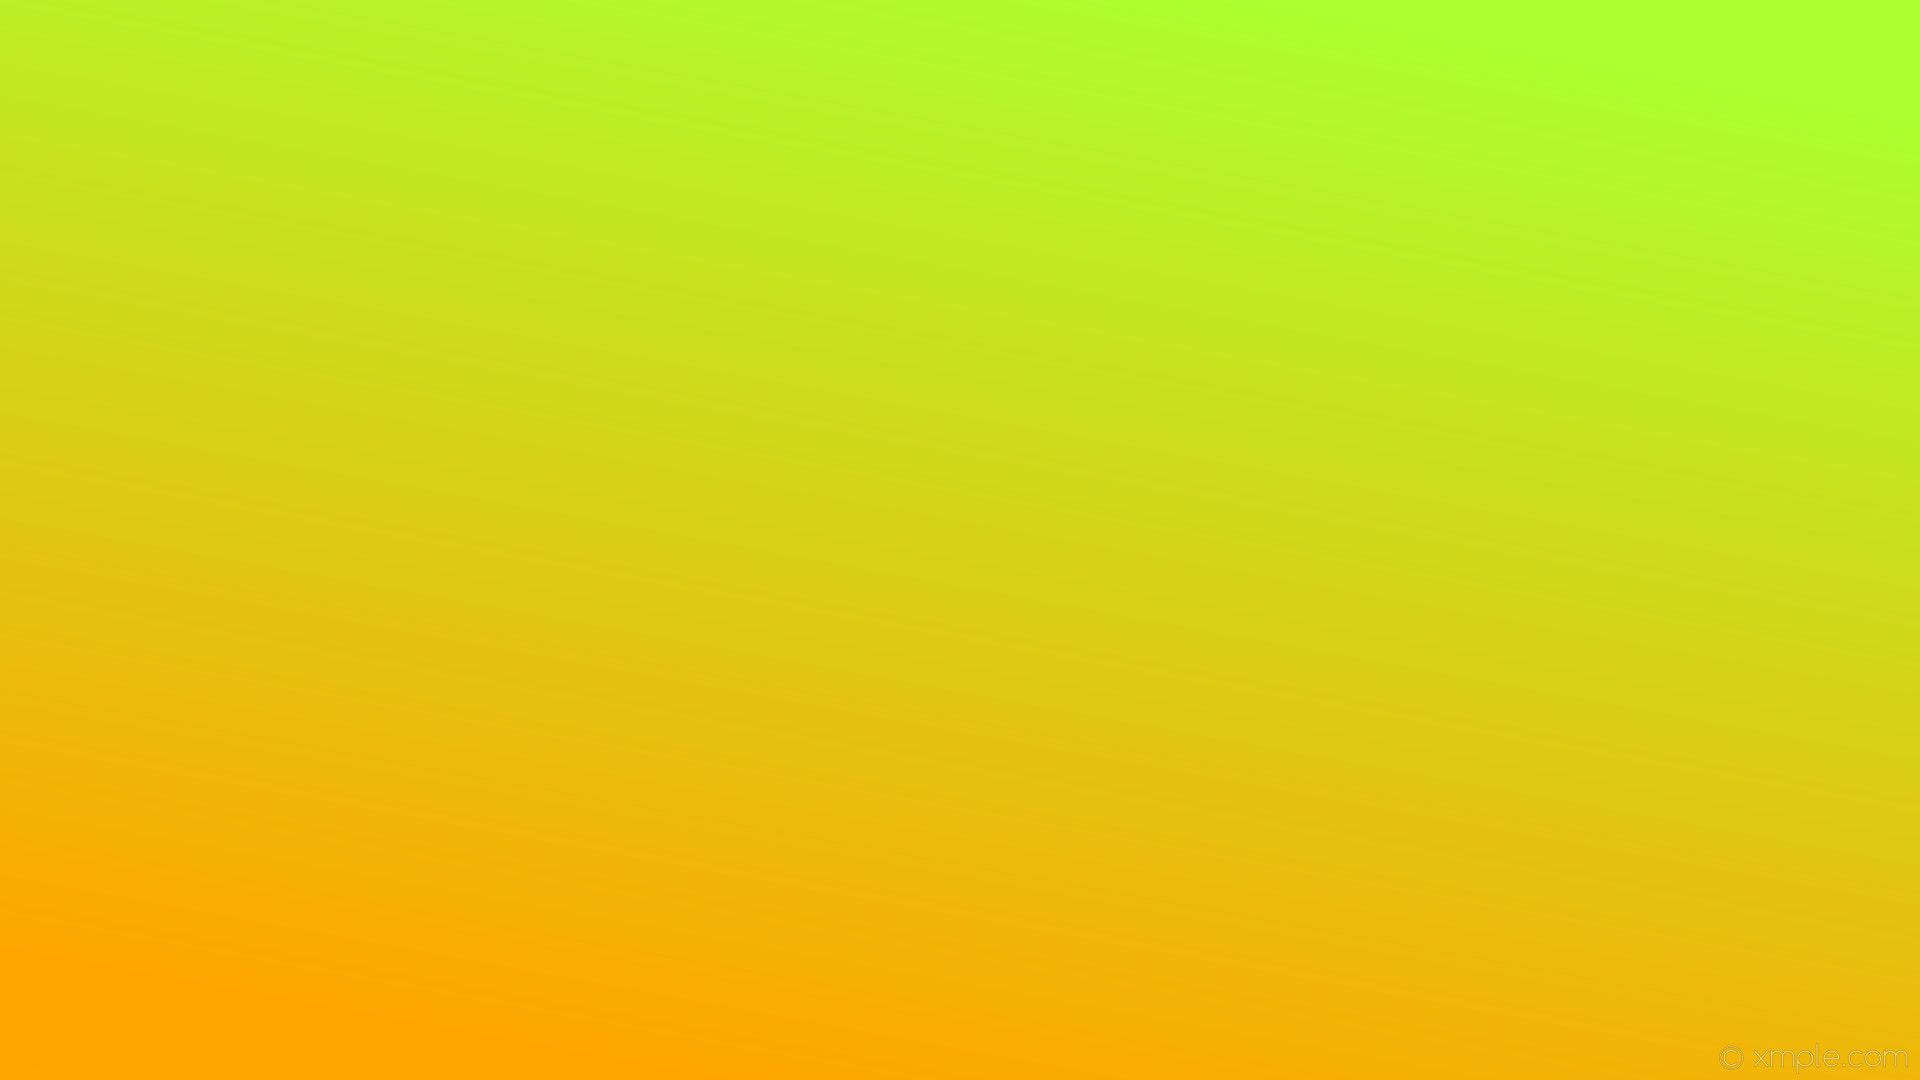 1920x1080 Orange And Green Wallpapers